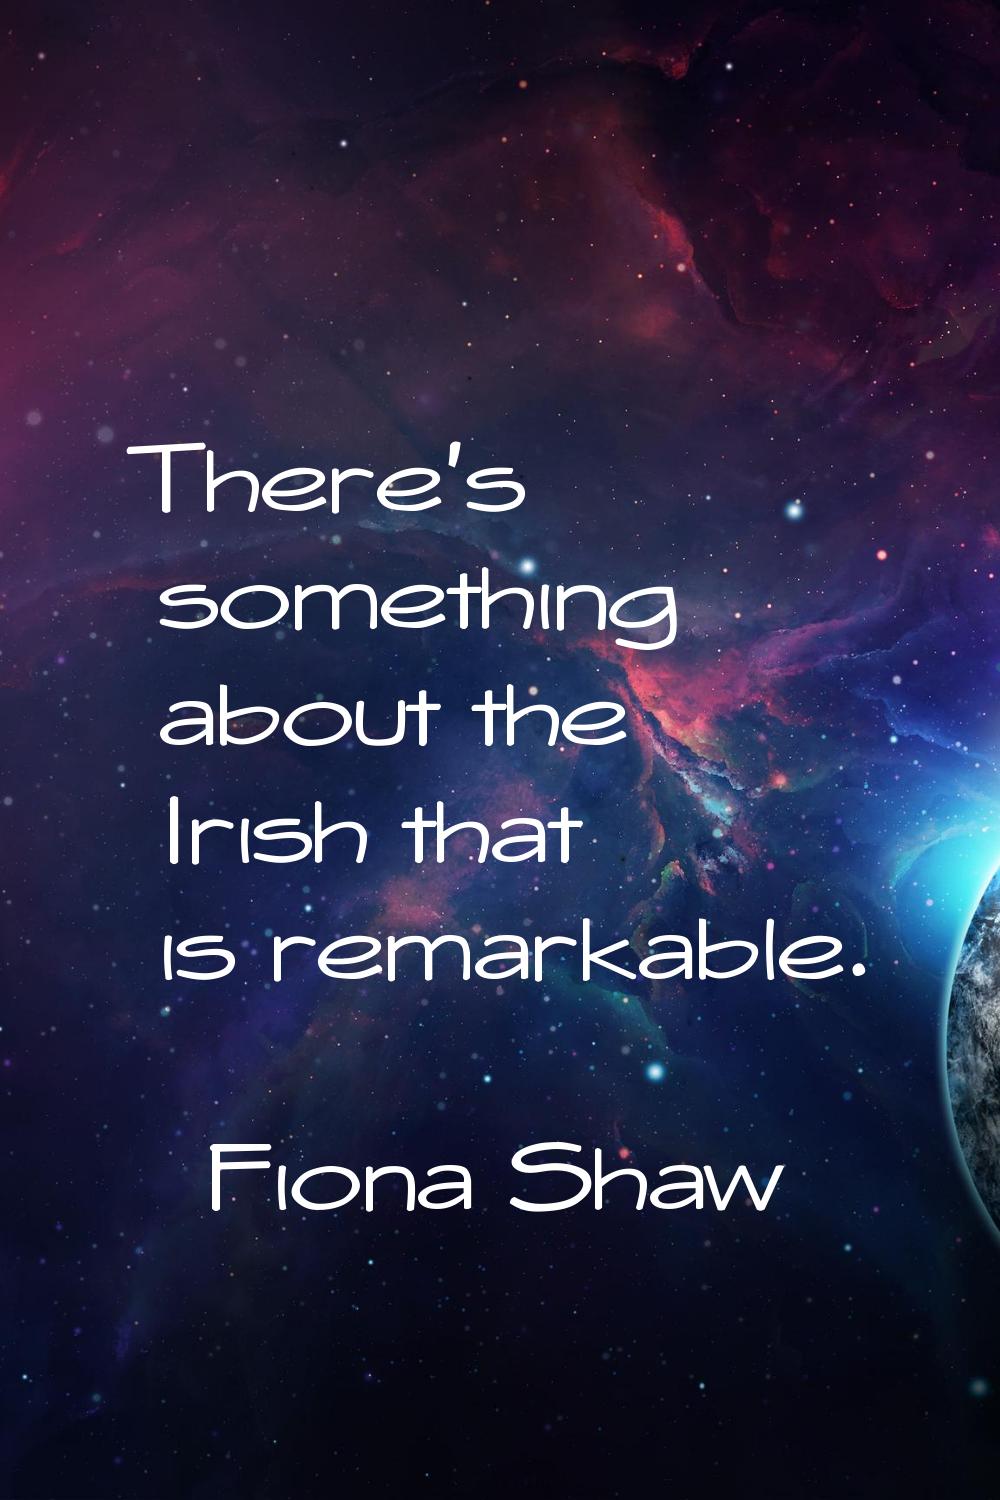 There's something about the Irish that is remarkable.